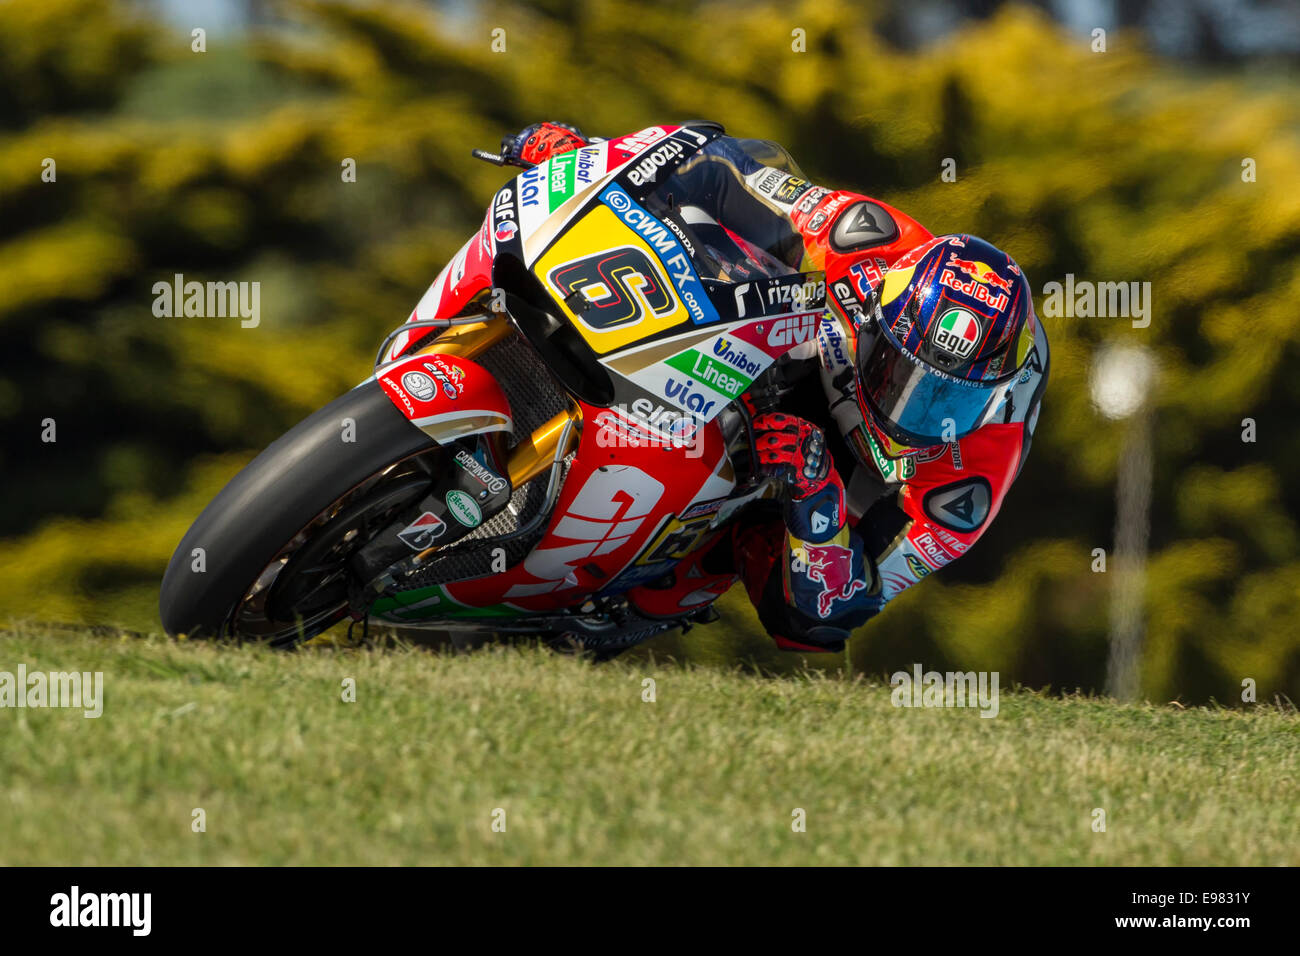 German rider Stefan Bradl in action during Friday free practice of the 2014 Tissot Australian Motorcycle Grand Prix. Stock Photo